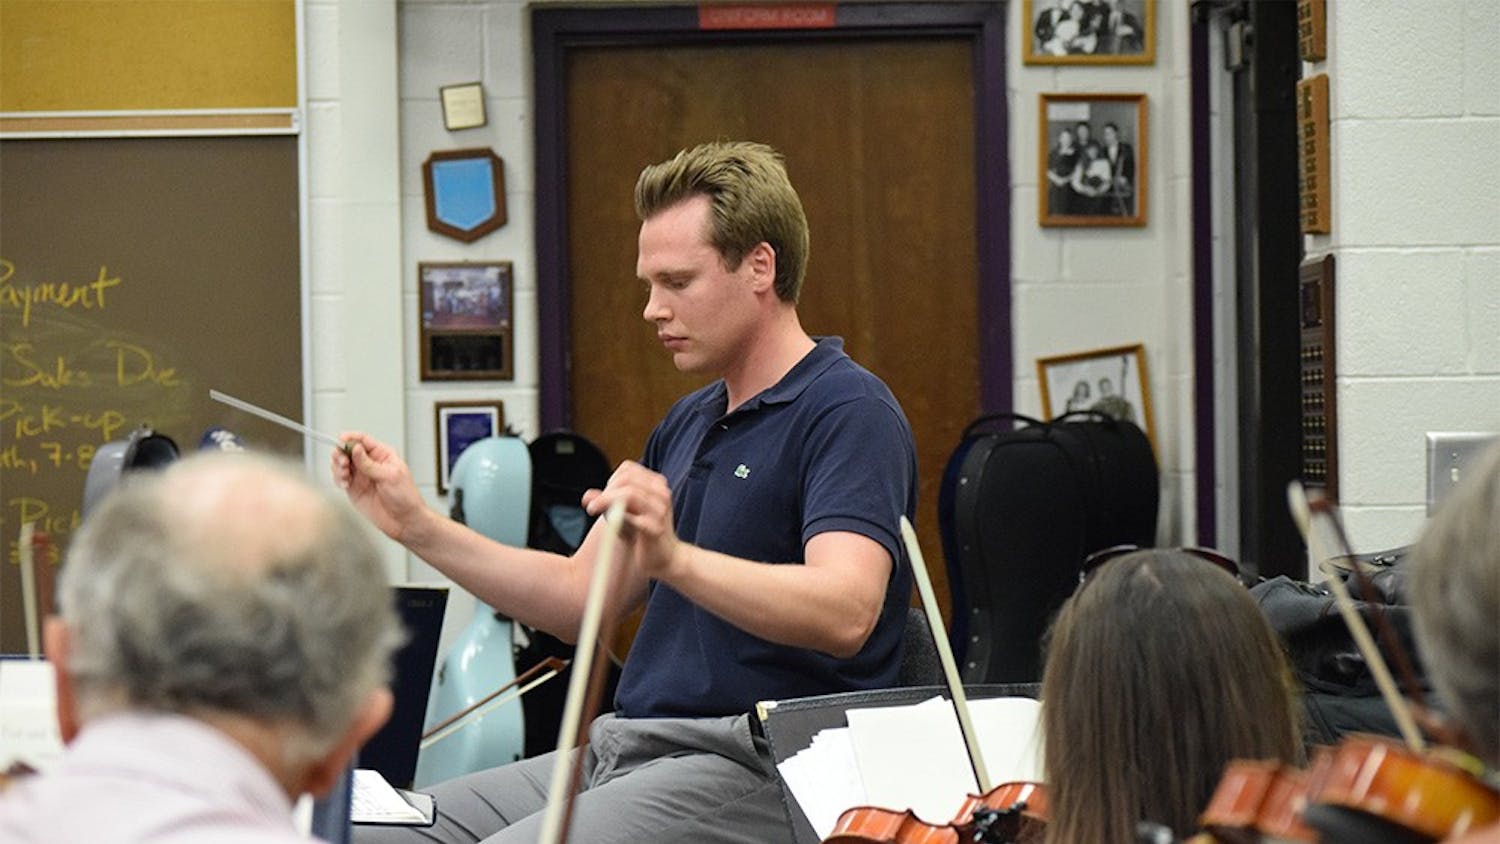 Artistic director Adam Bodony conducts the Bloomington Symphony Orchestra in a string rehearsal Sept. 15, 2015, in the orchestra room of Bloomington High School South.